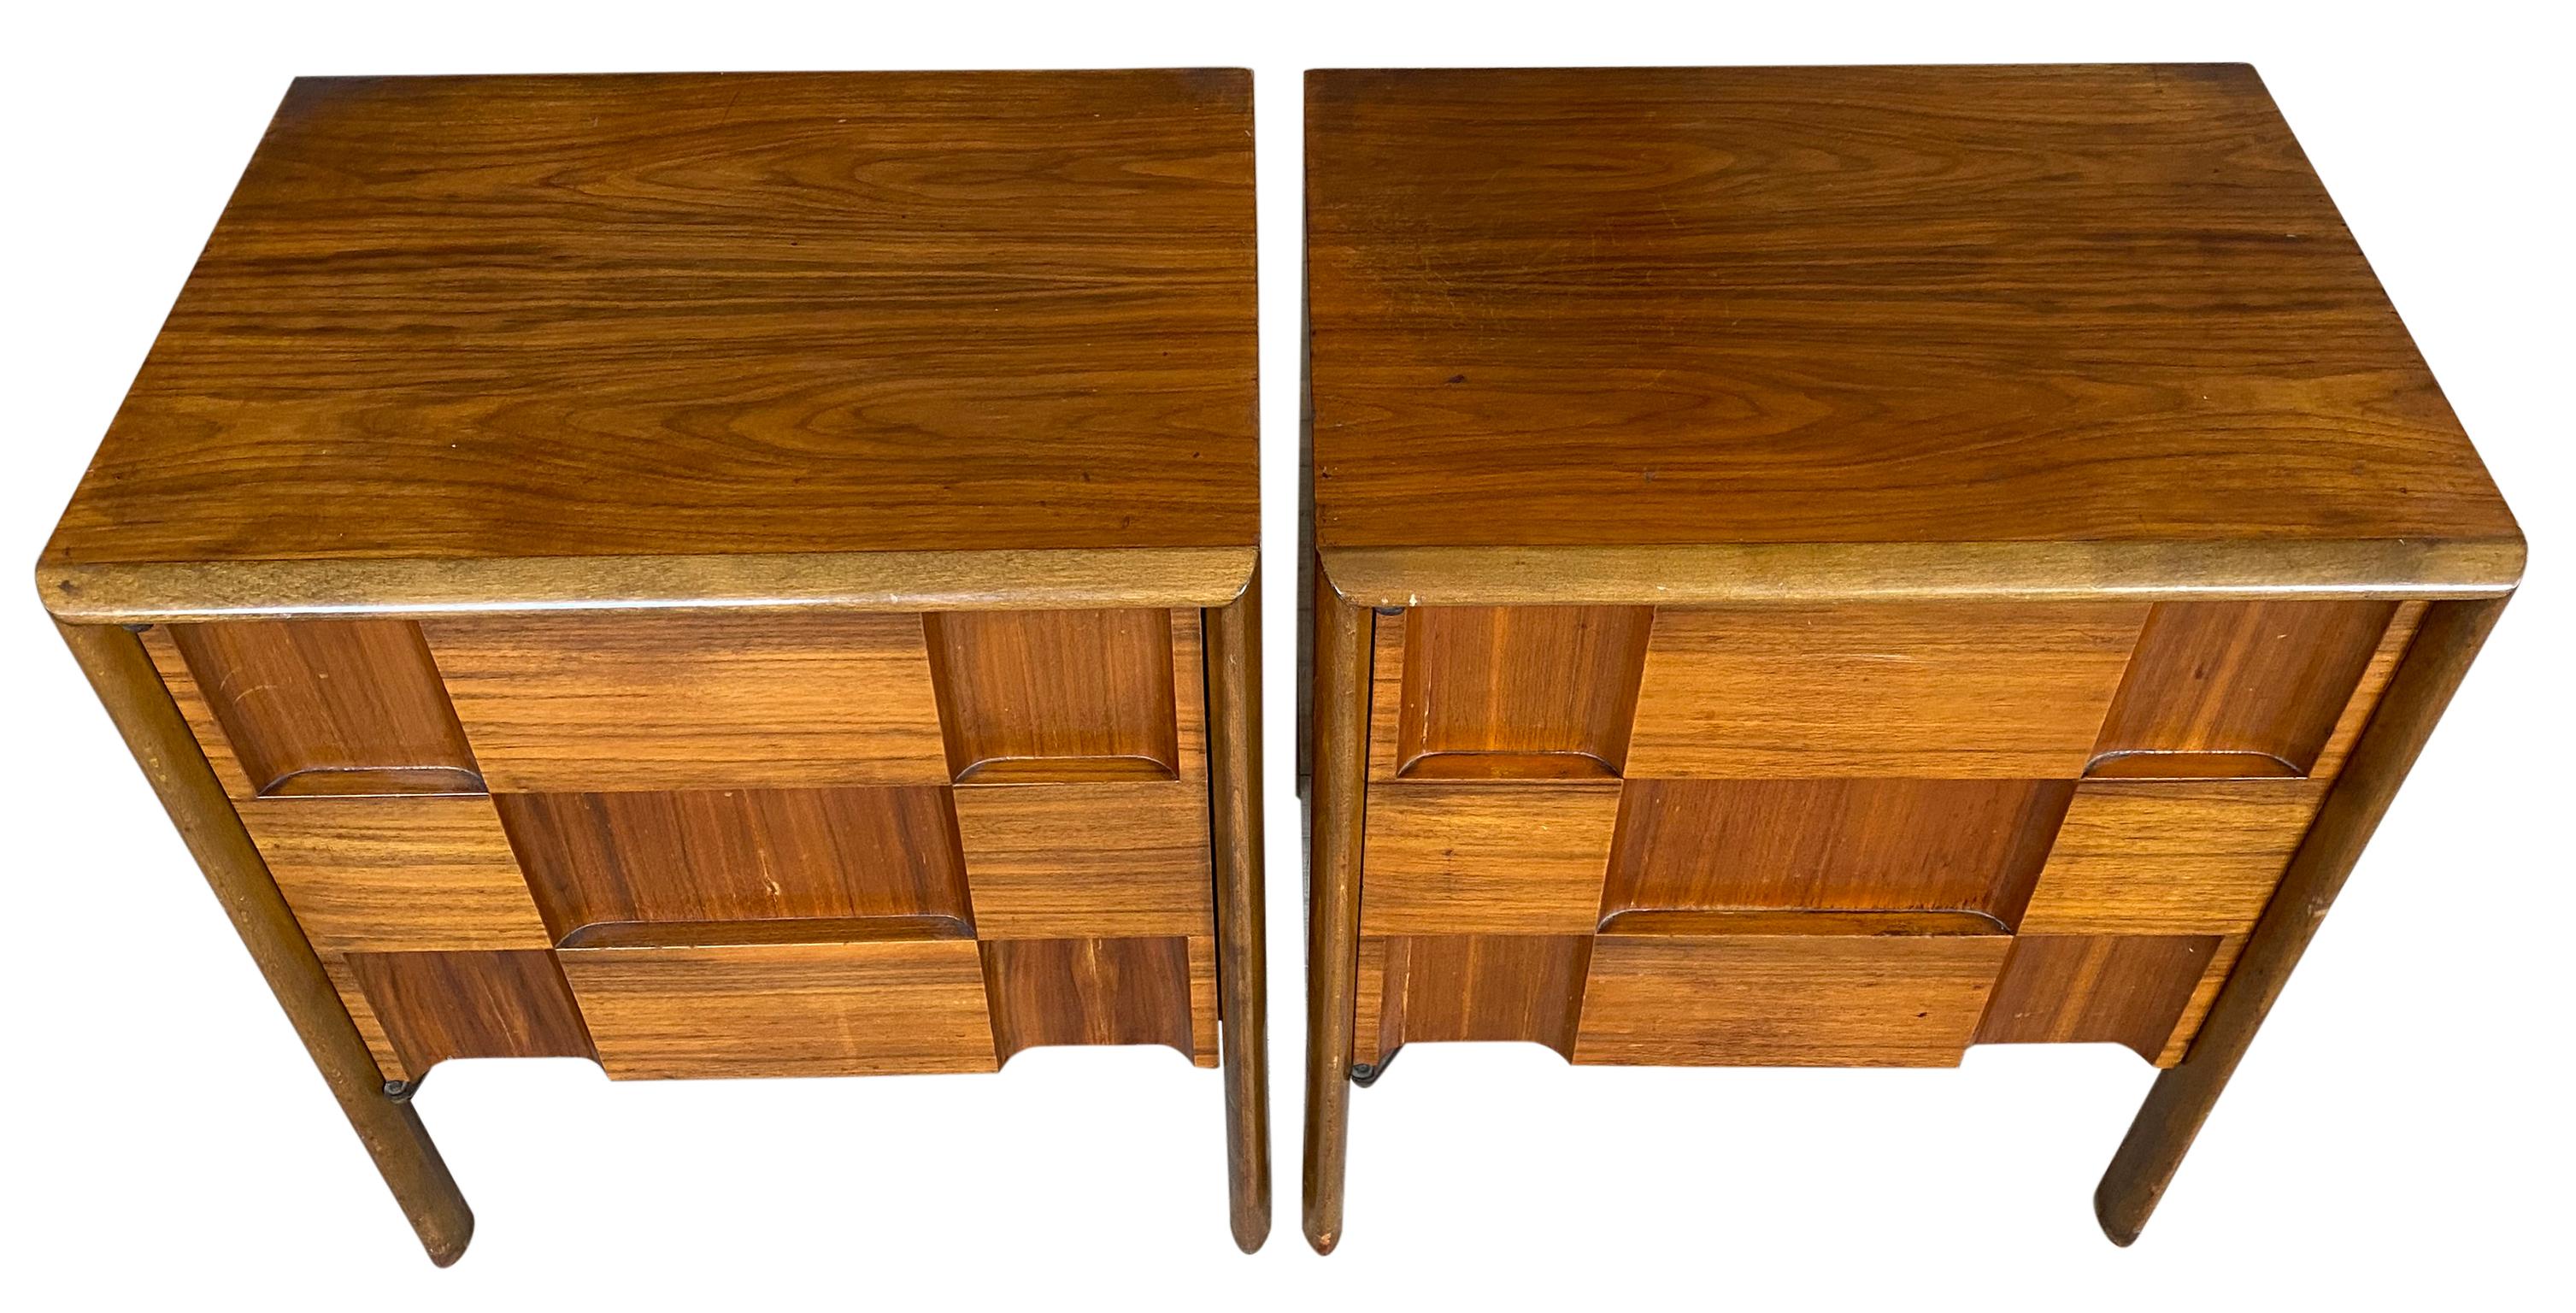 Beautiful pair of Edmond Spence checkerboard nightstands. Great wood tones with very detailed brass hardware great patina. Made in Sweden - Each nightstand has (1) door that swings open with (1) Adjustable shelf inside with 4 shelf pins. All